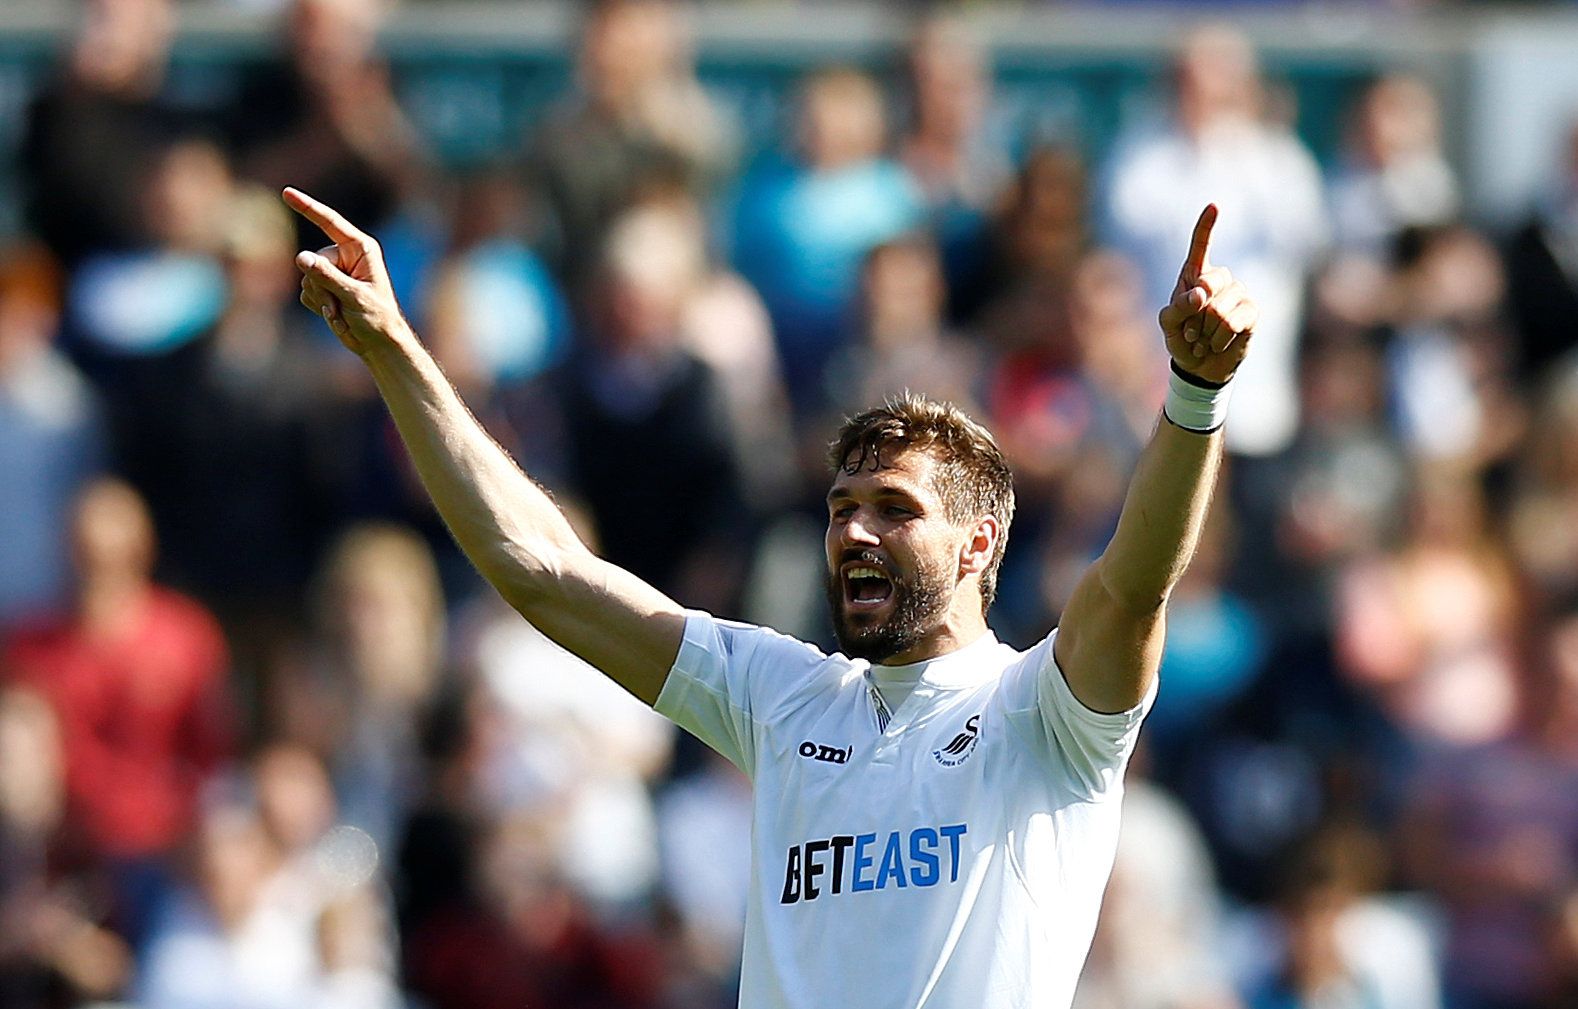 Britain Football Soccer - Swansea City v West Bromwich Albion - Premier League - Liberty Stadium - 21/5/17Swansea City’s Fernando Llorente celebrates at the end of the matchAction Images via Reuters / Peter CziborraEDITORIAL USE ONLY. No use with unauthorized audio, video, data, fixture lists, club/league logos or 